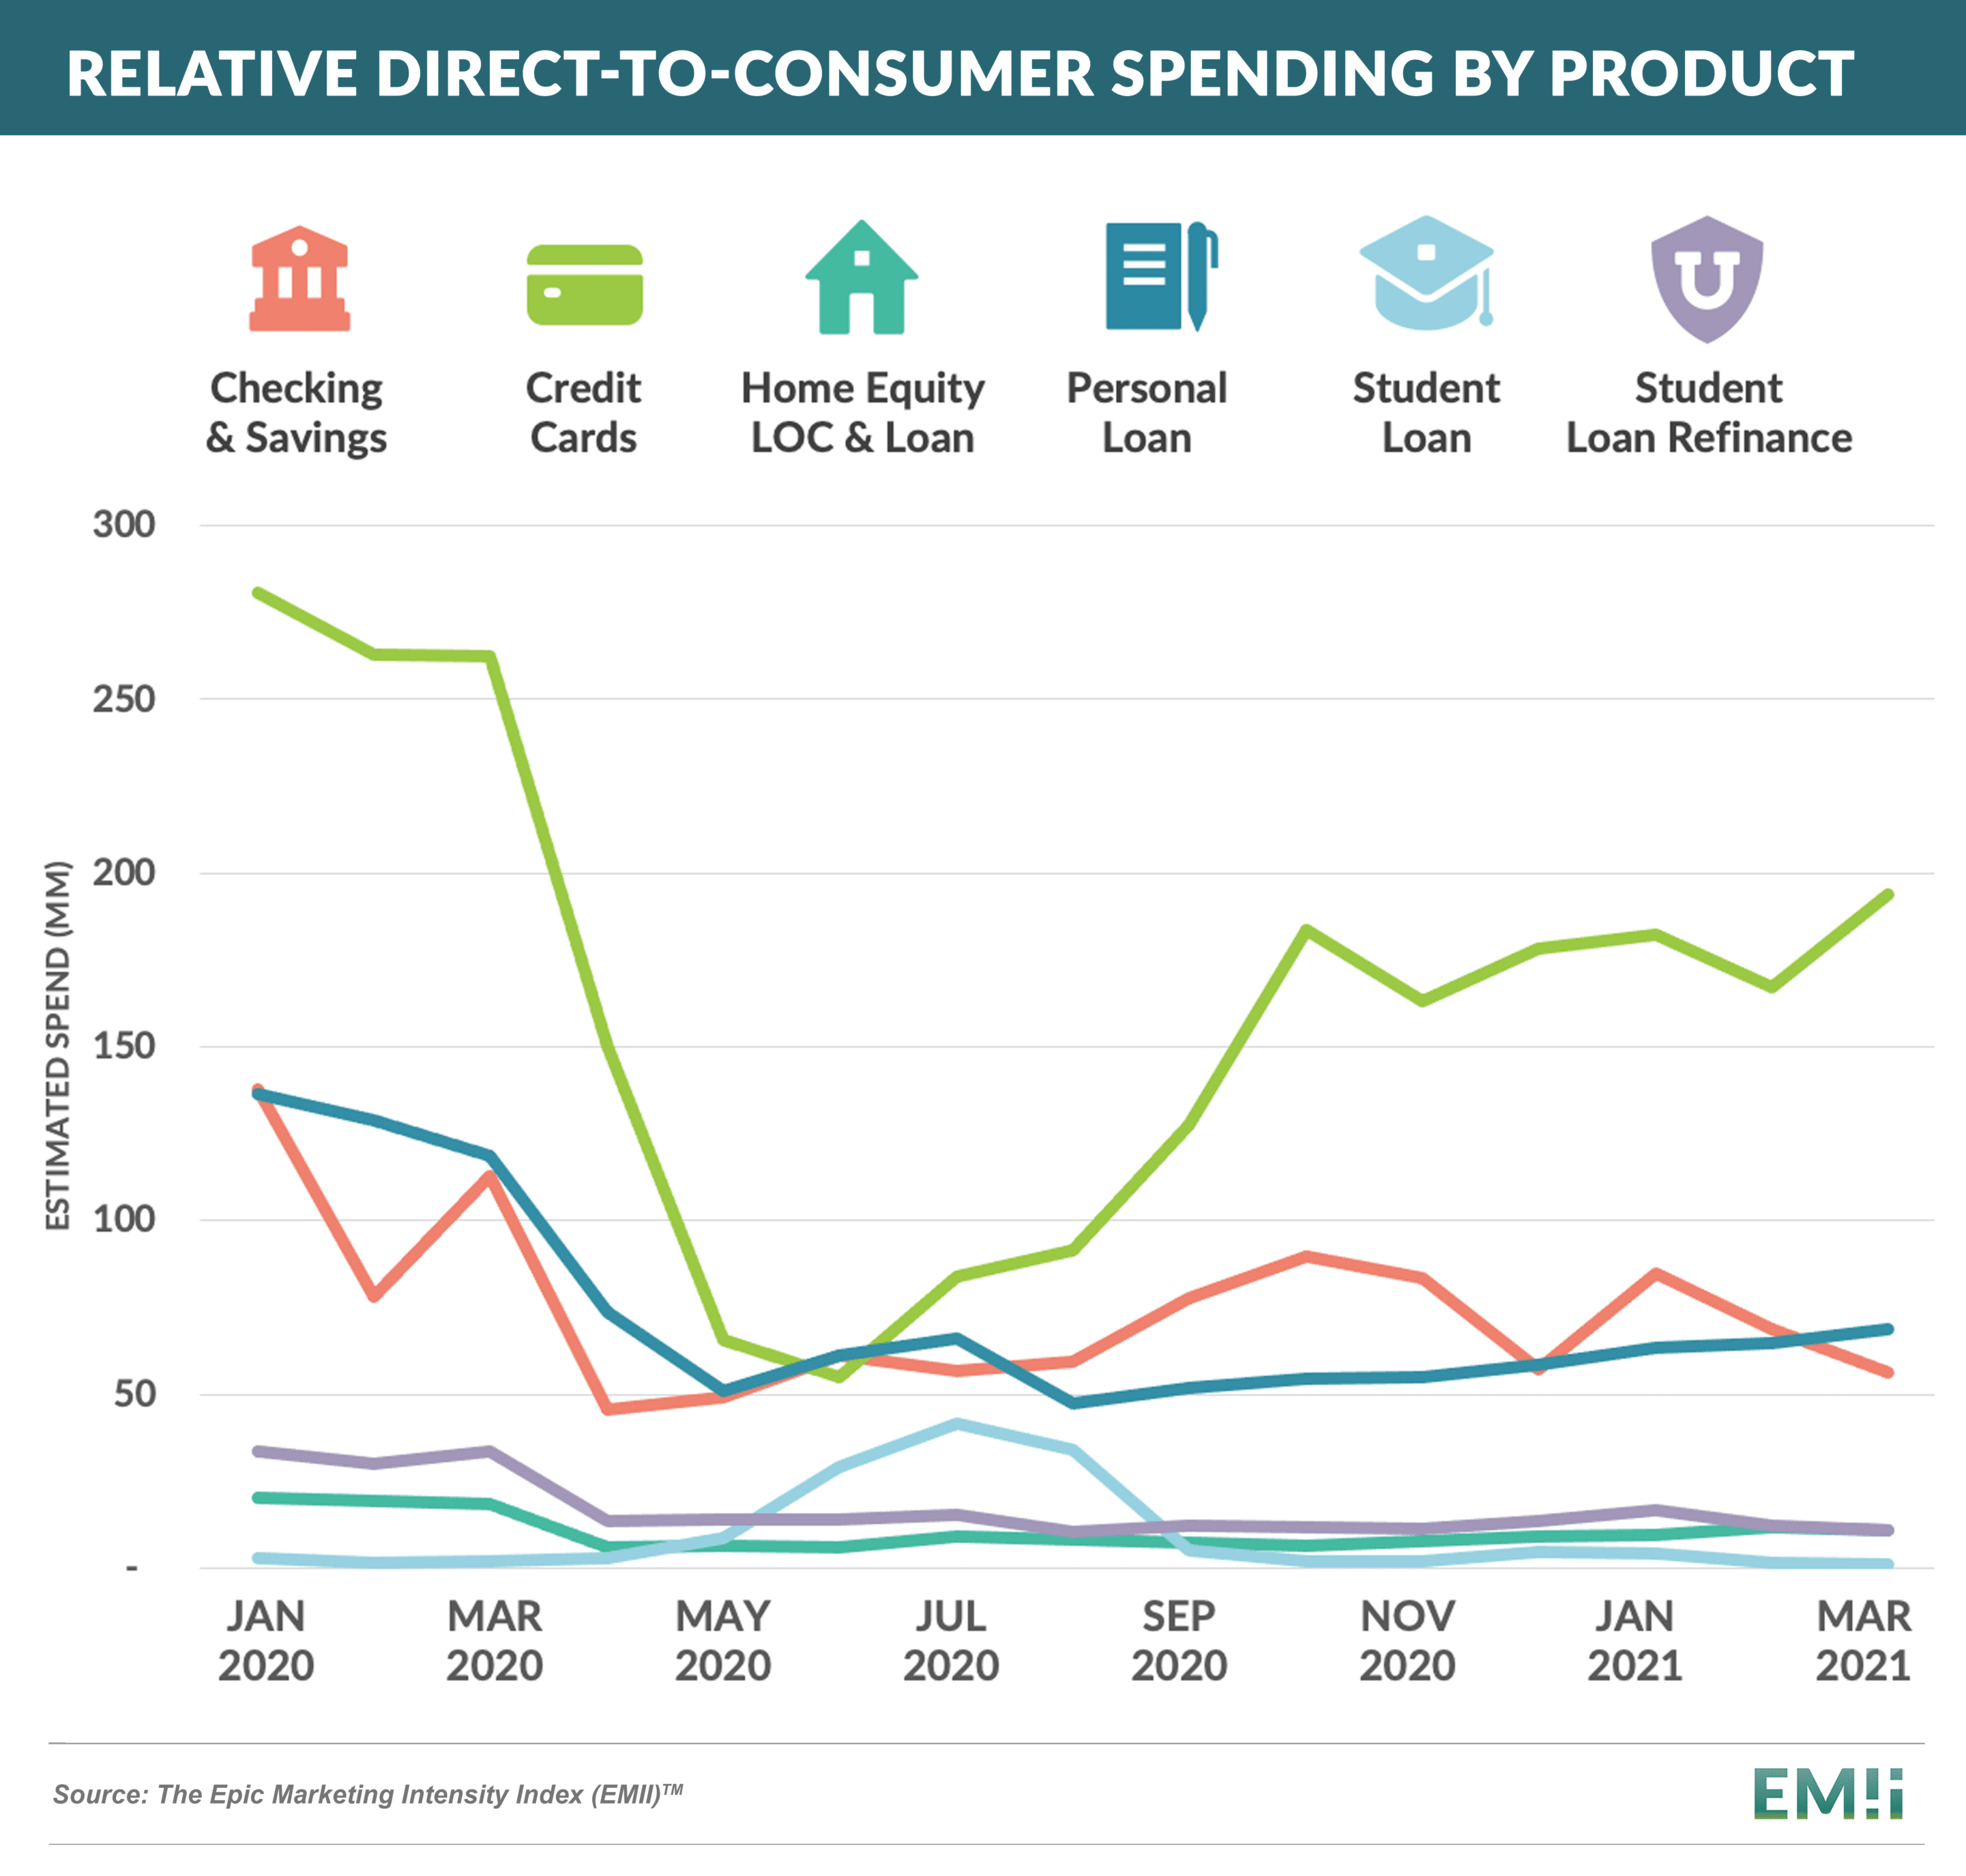 Relative Direct-to-Consumer Spending by Product